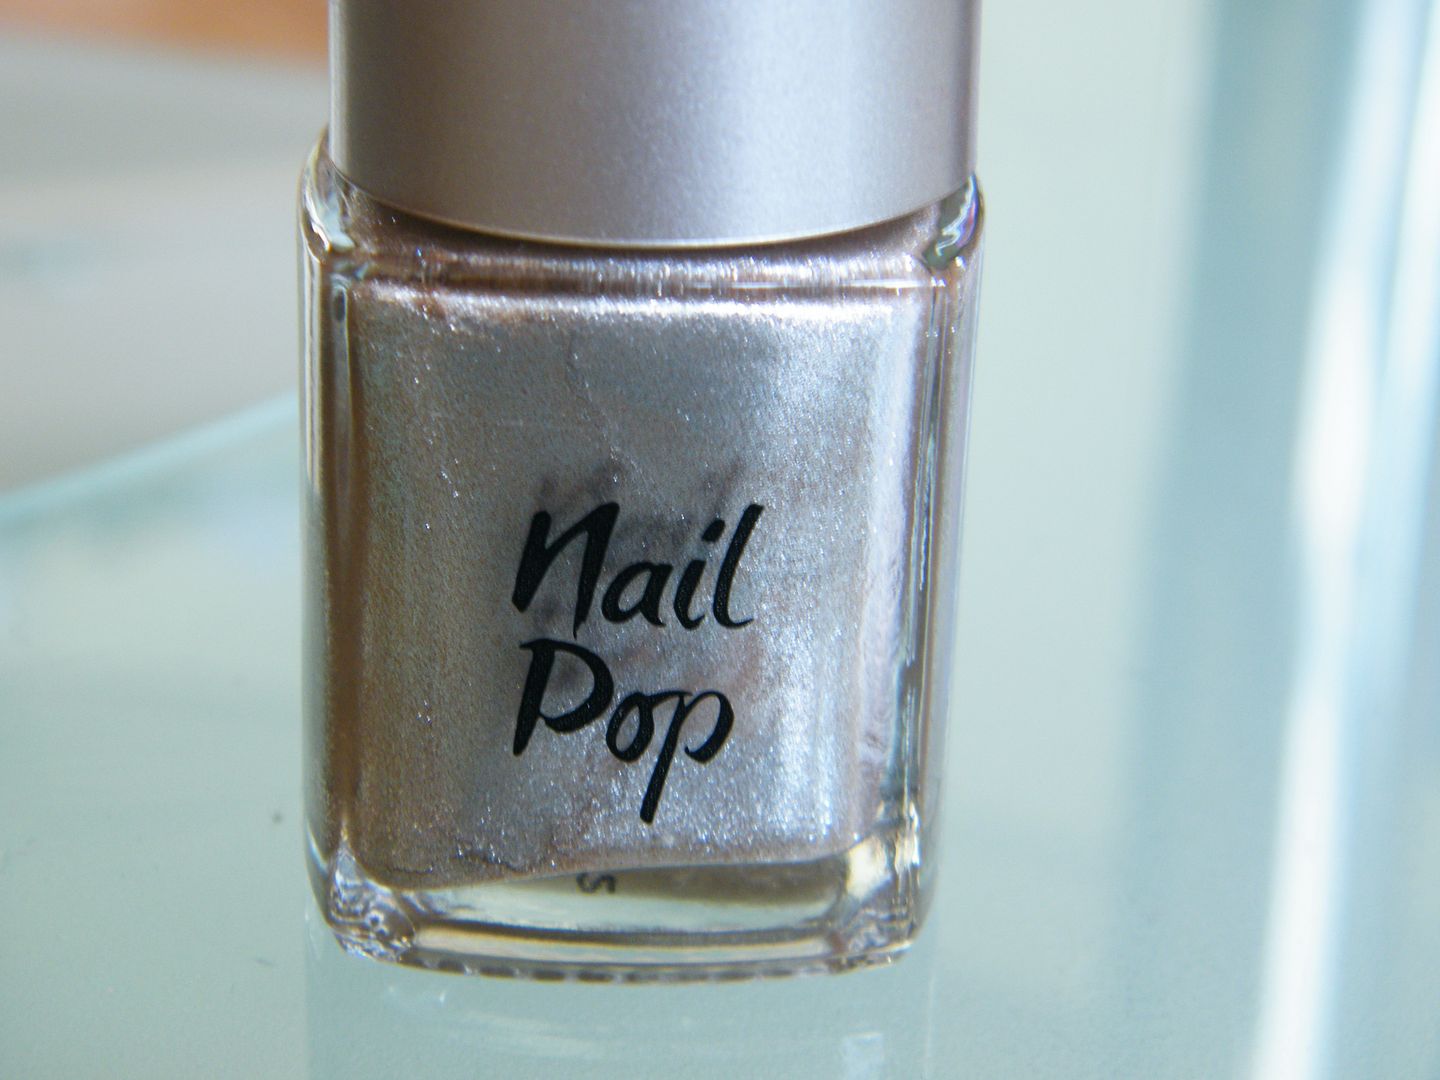 Look Beauty Nail Pop in Lacquer